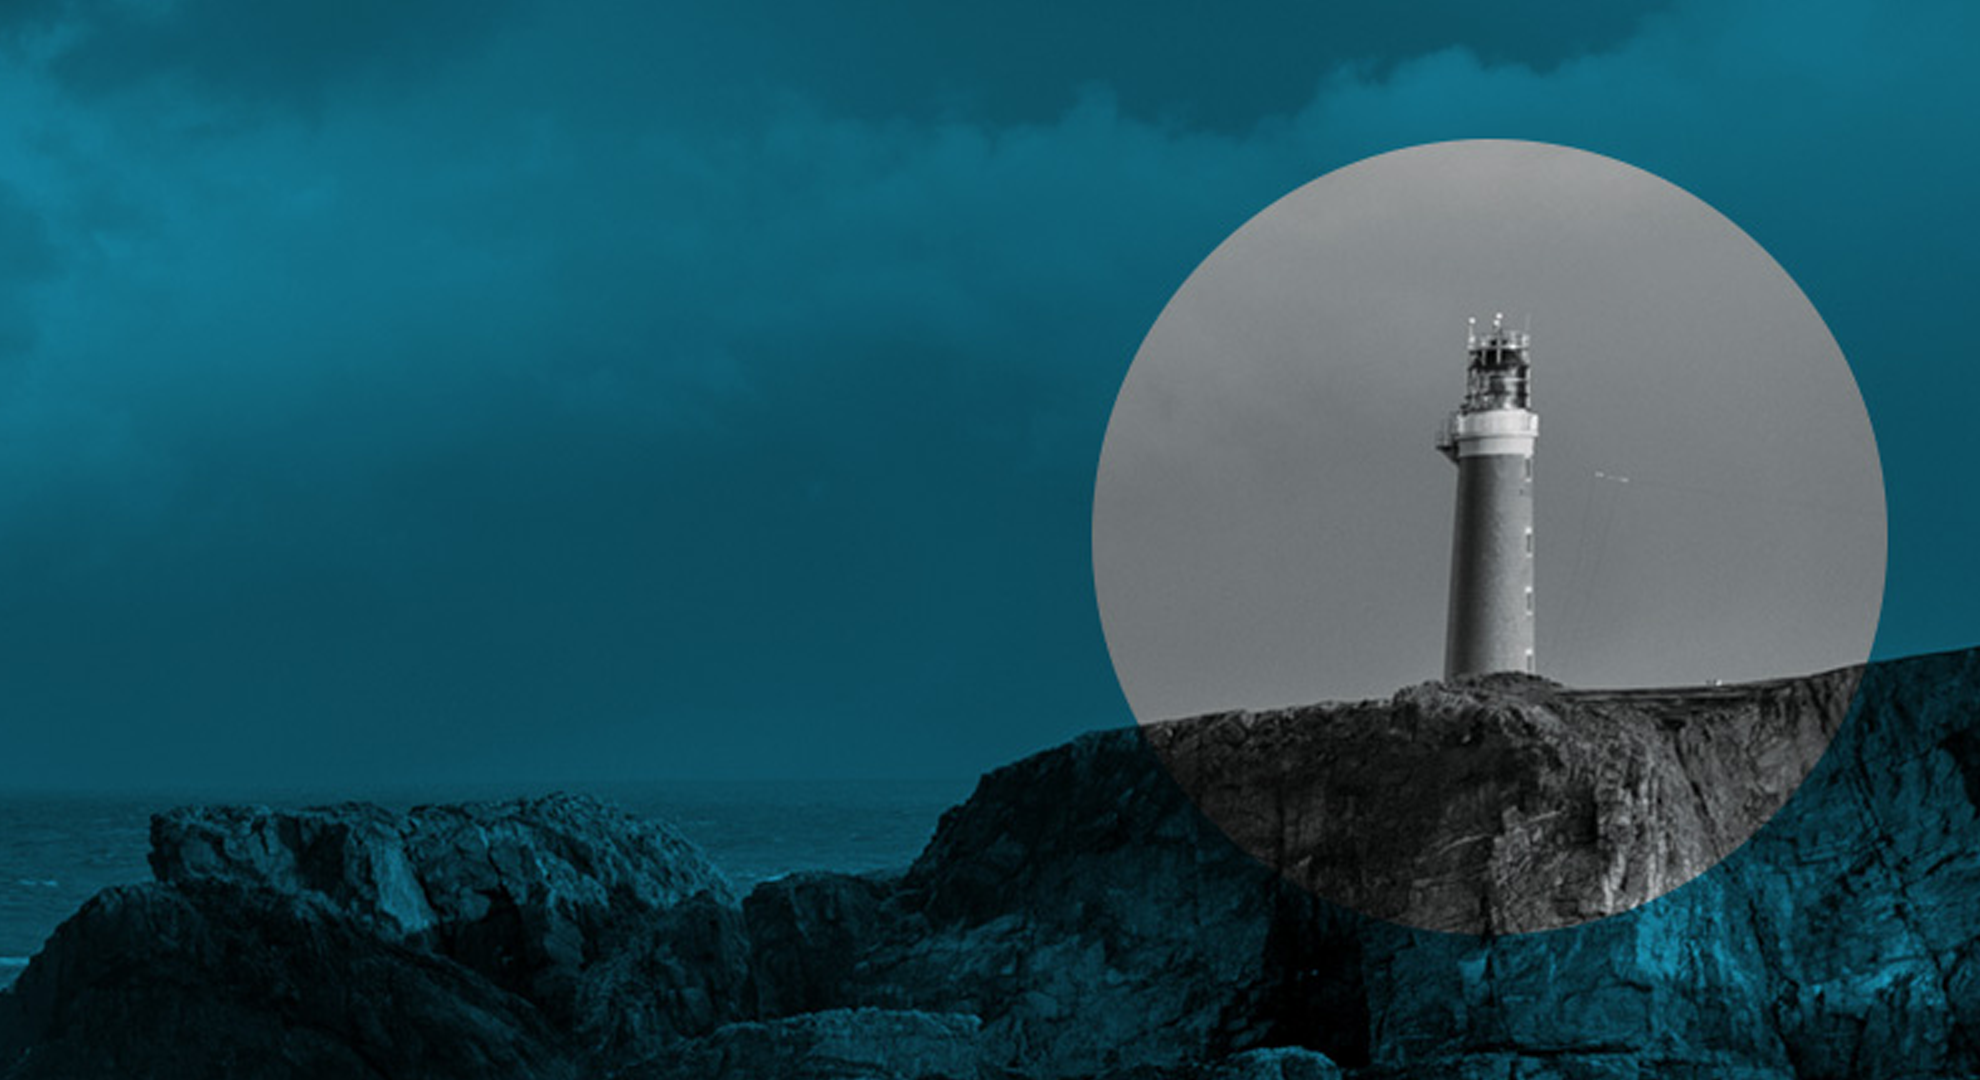 A lighthouse on a cliff, representing Zero Waste Scotland as "The Lighthouse of the Circular Economy"